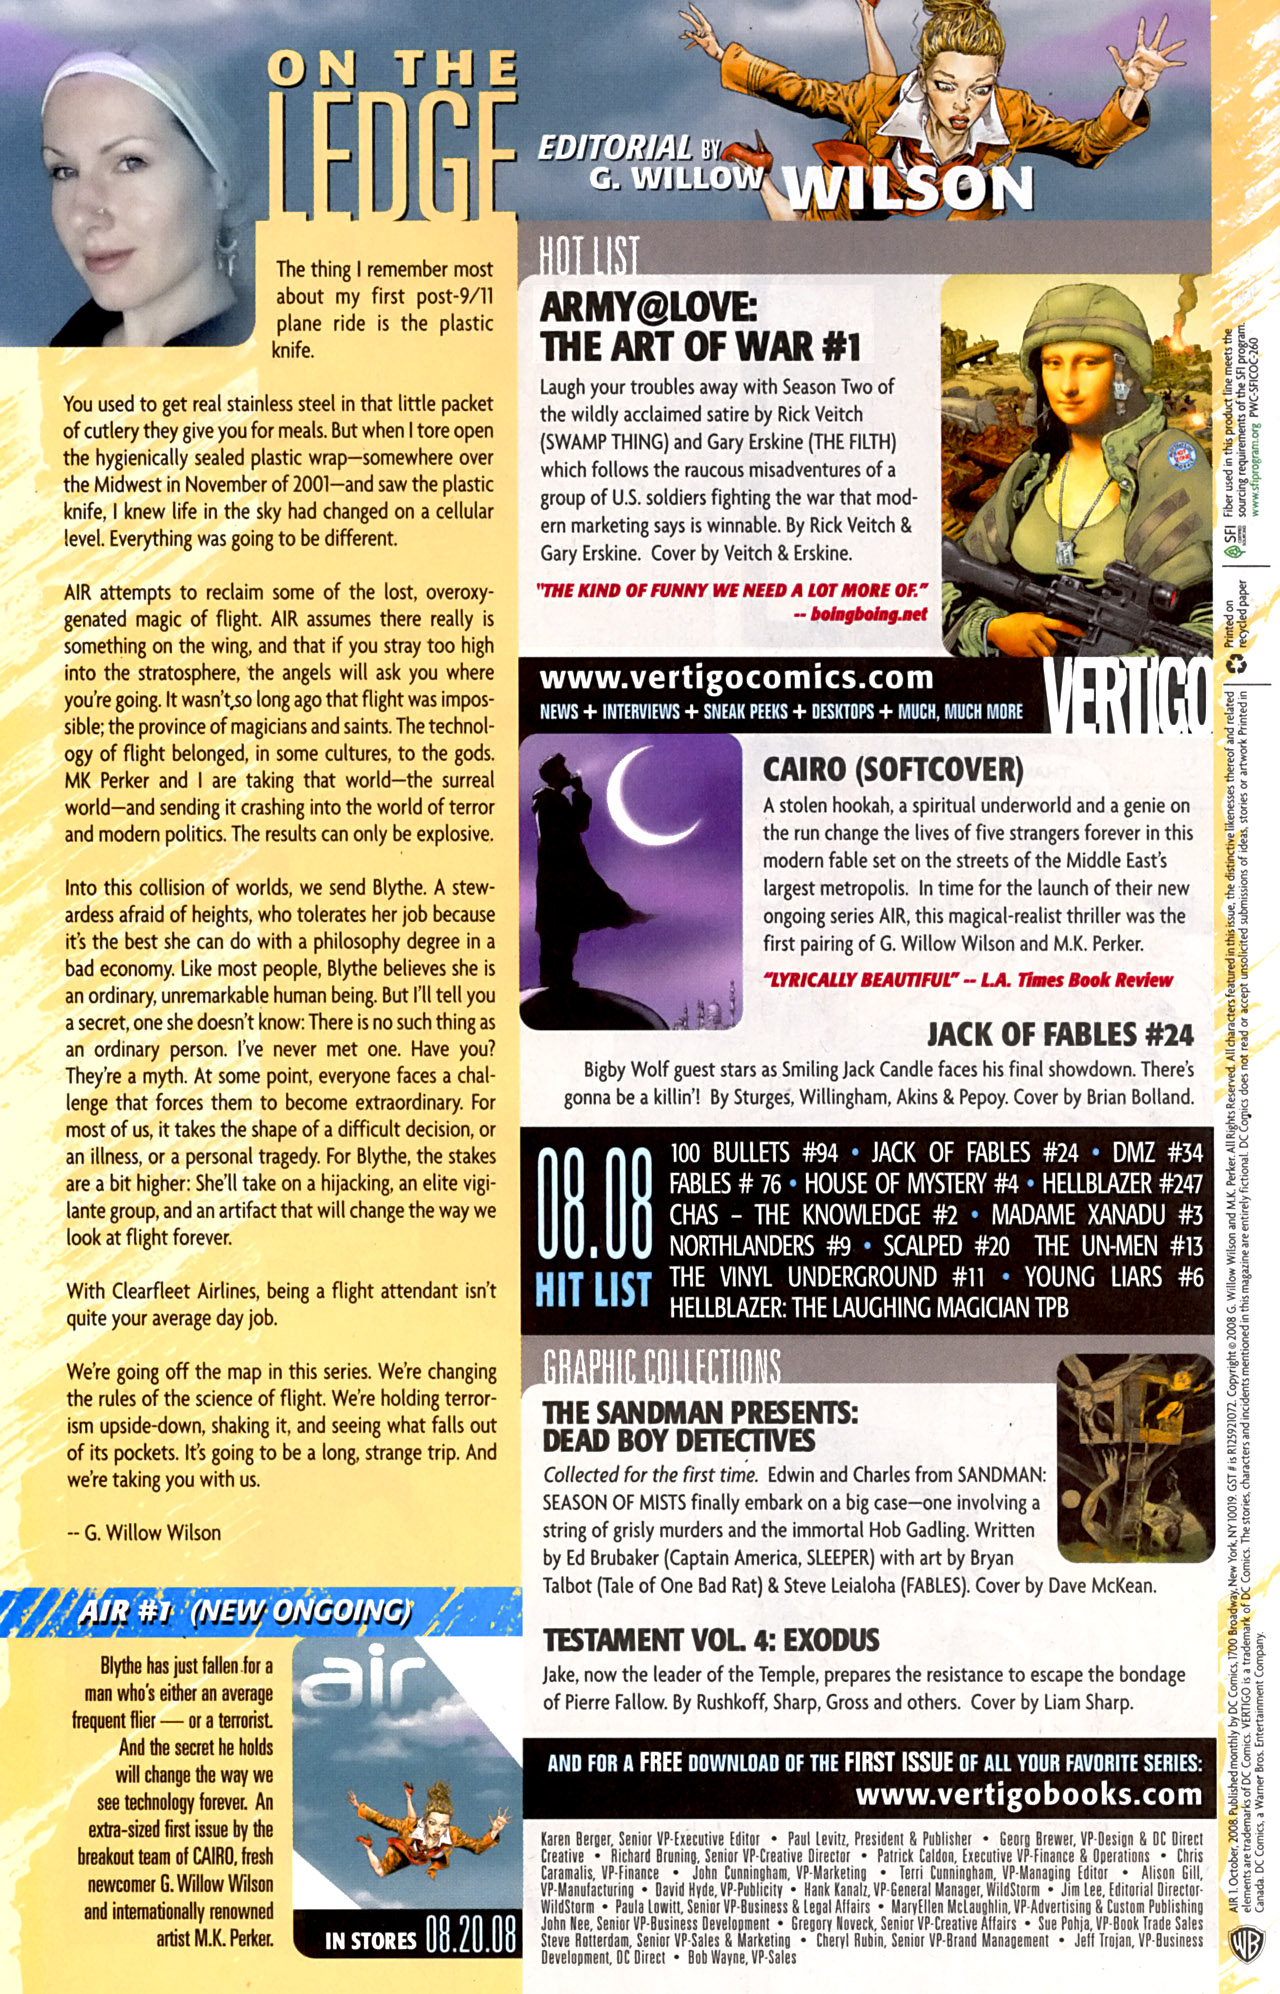 Read online Air comic -  Issue #1 - 35